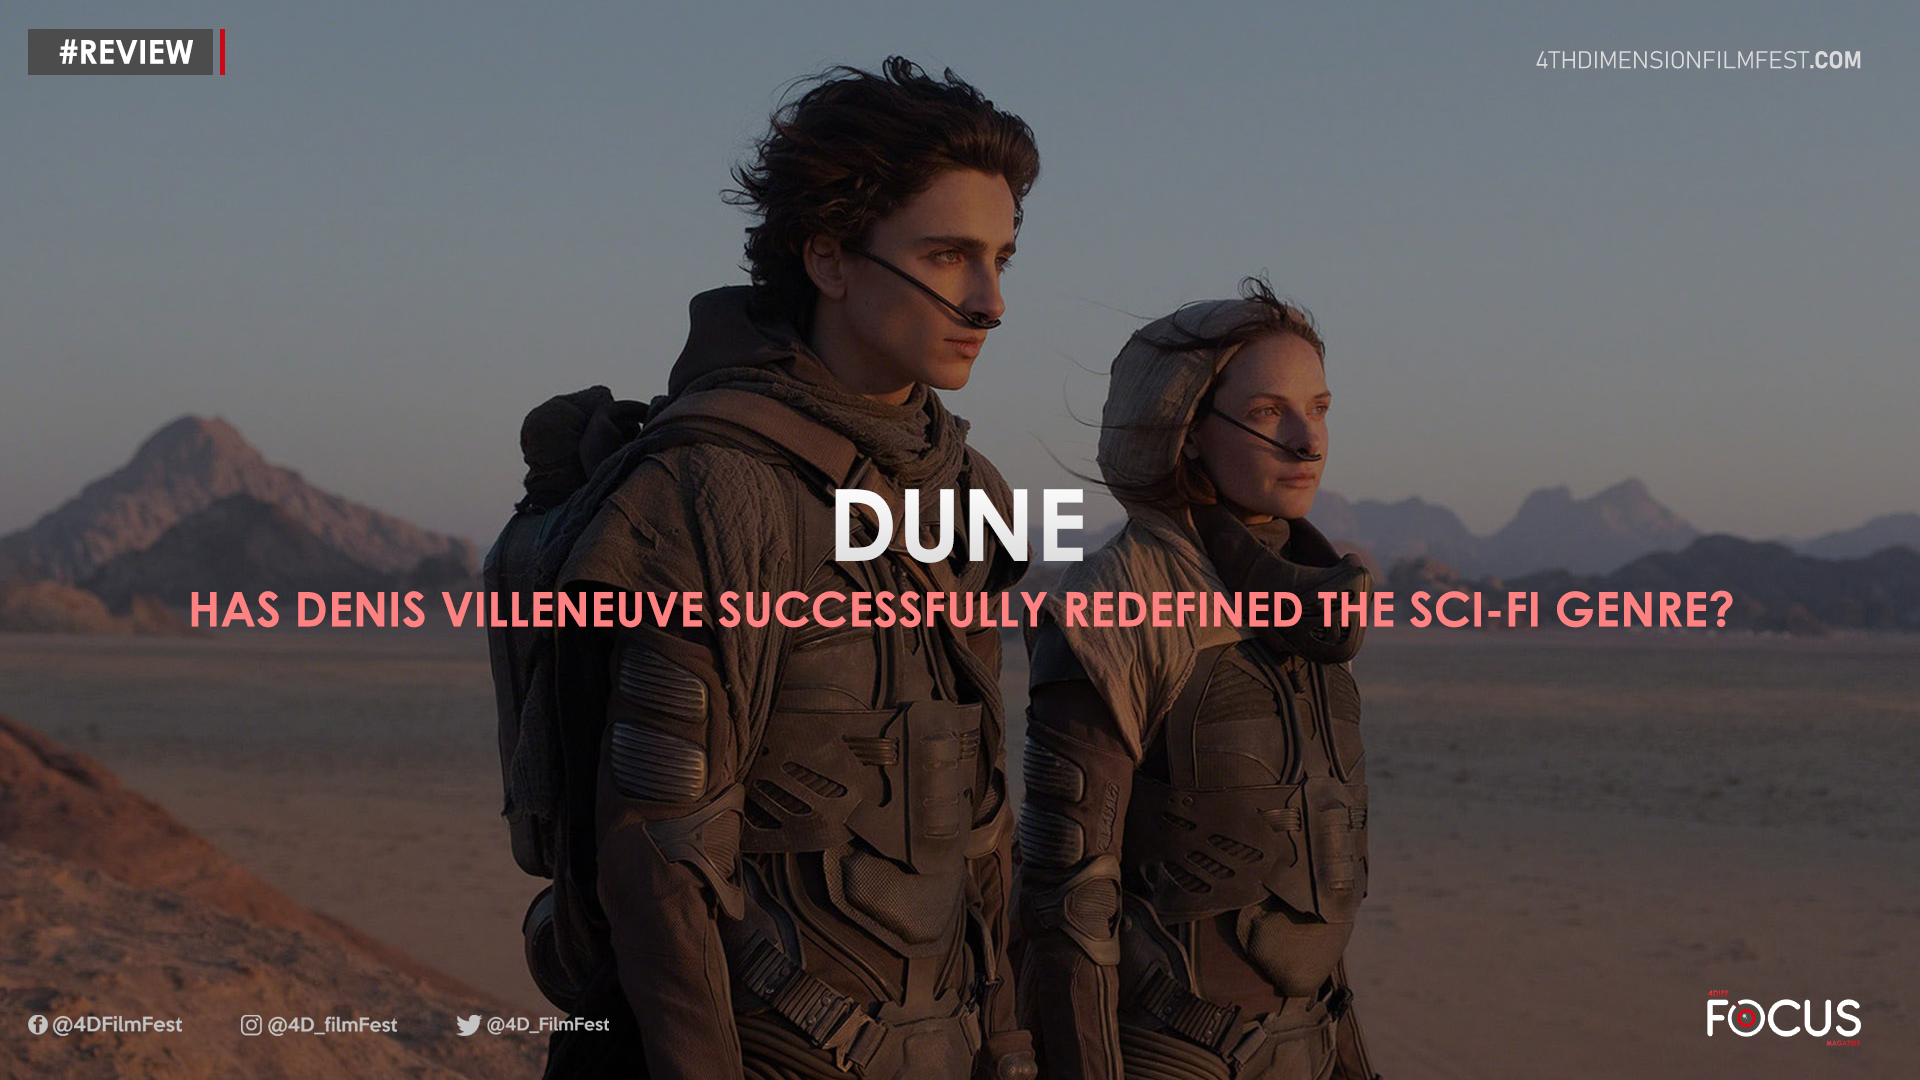 Dune : Has the director successfully redefined the Sci-fi genre?